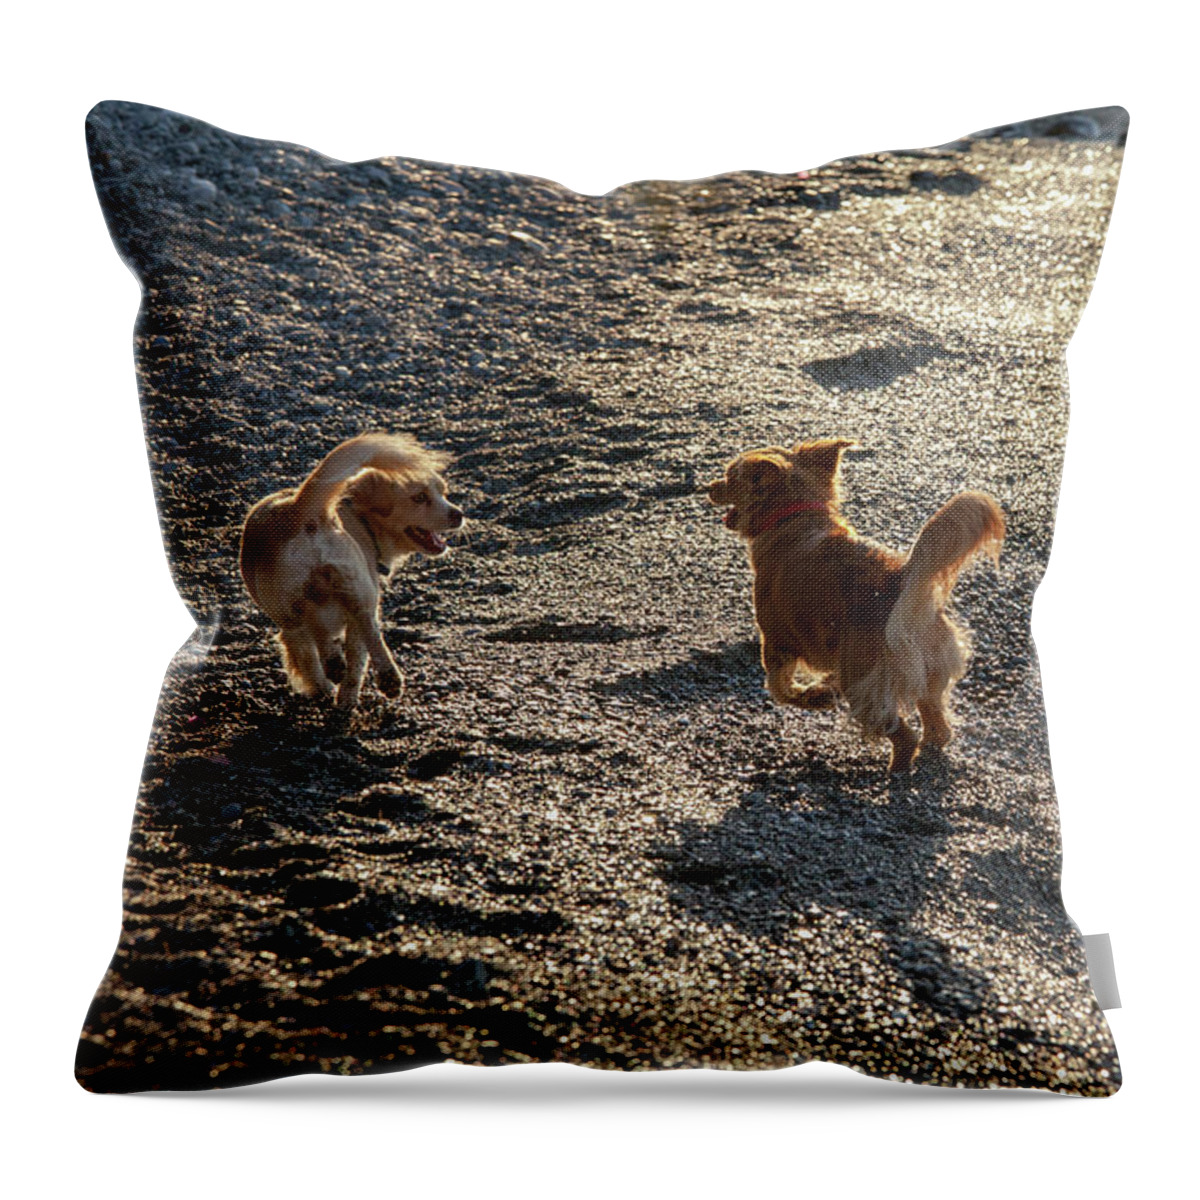 Greece Throw Pillow featuring the photograph If you want a friend be a friend by Casper Cammeraat